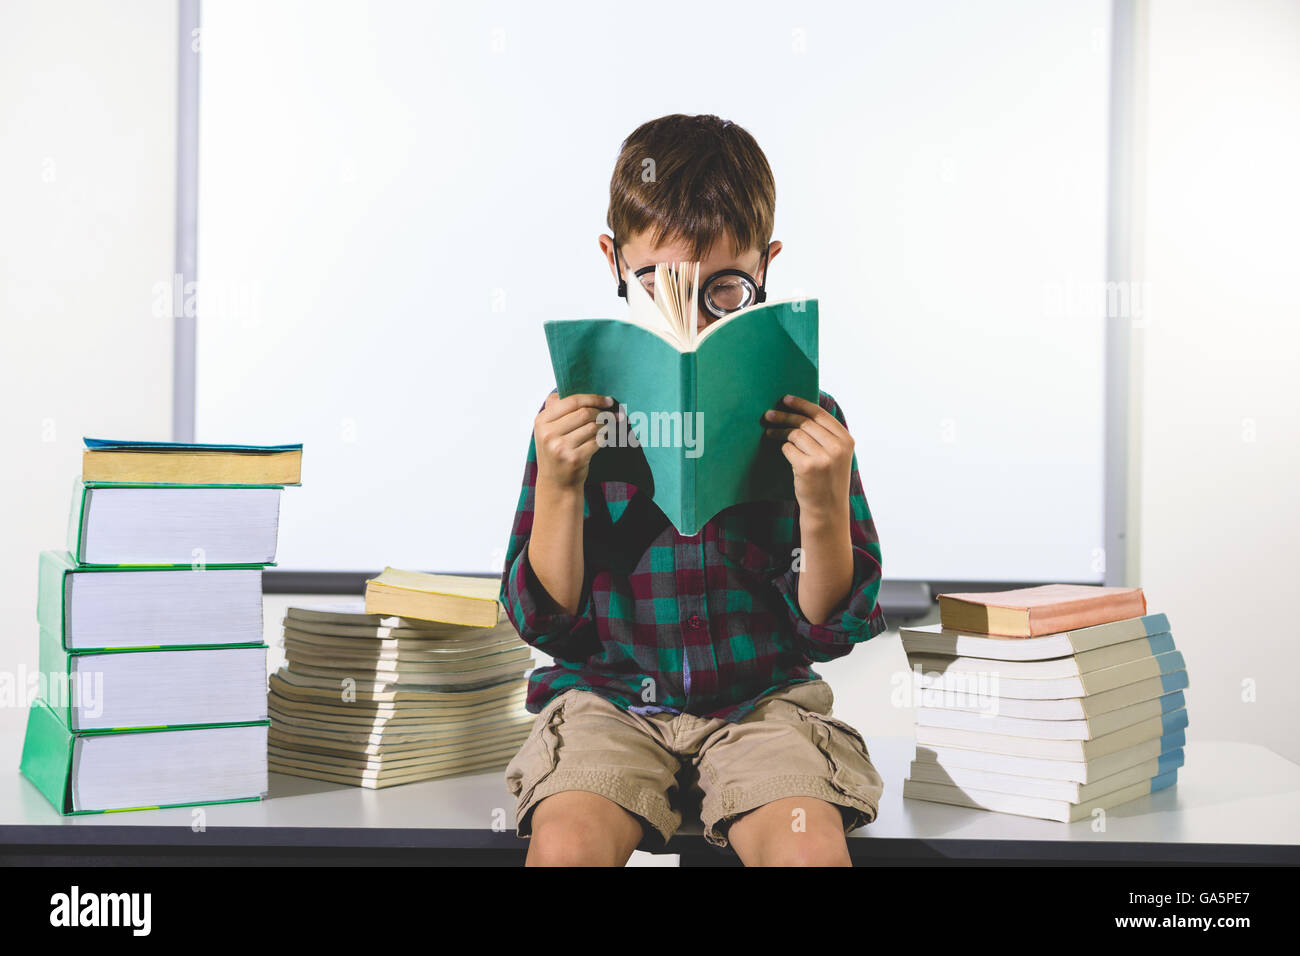 Elementary boy reading book while sitting in classroom Stock Photo